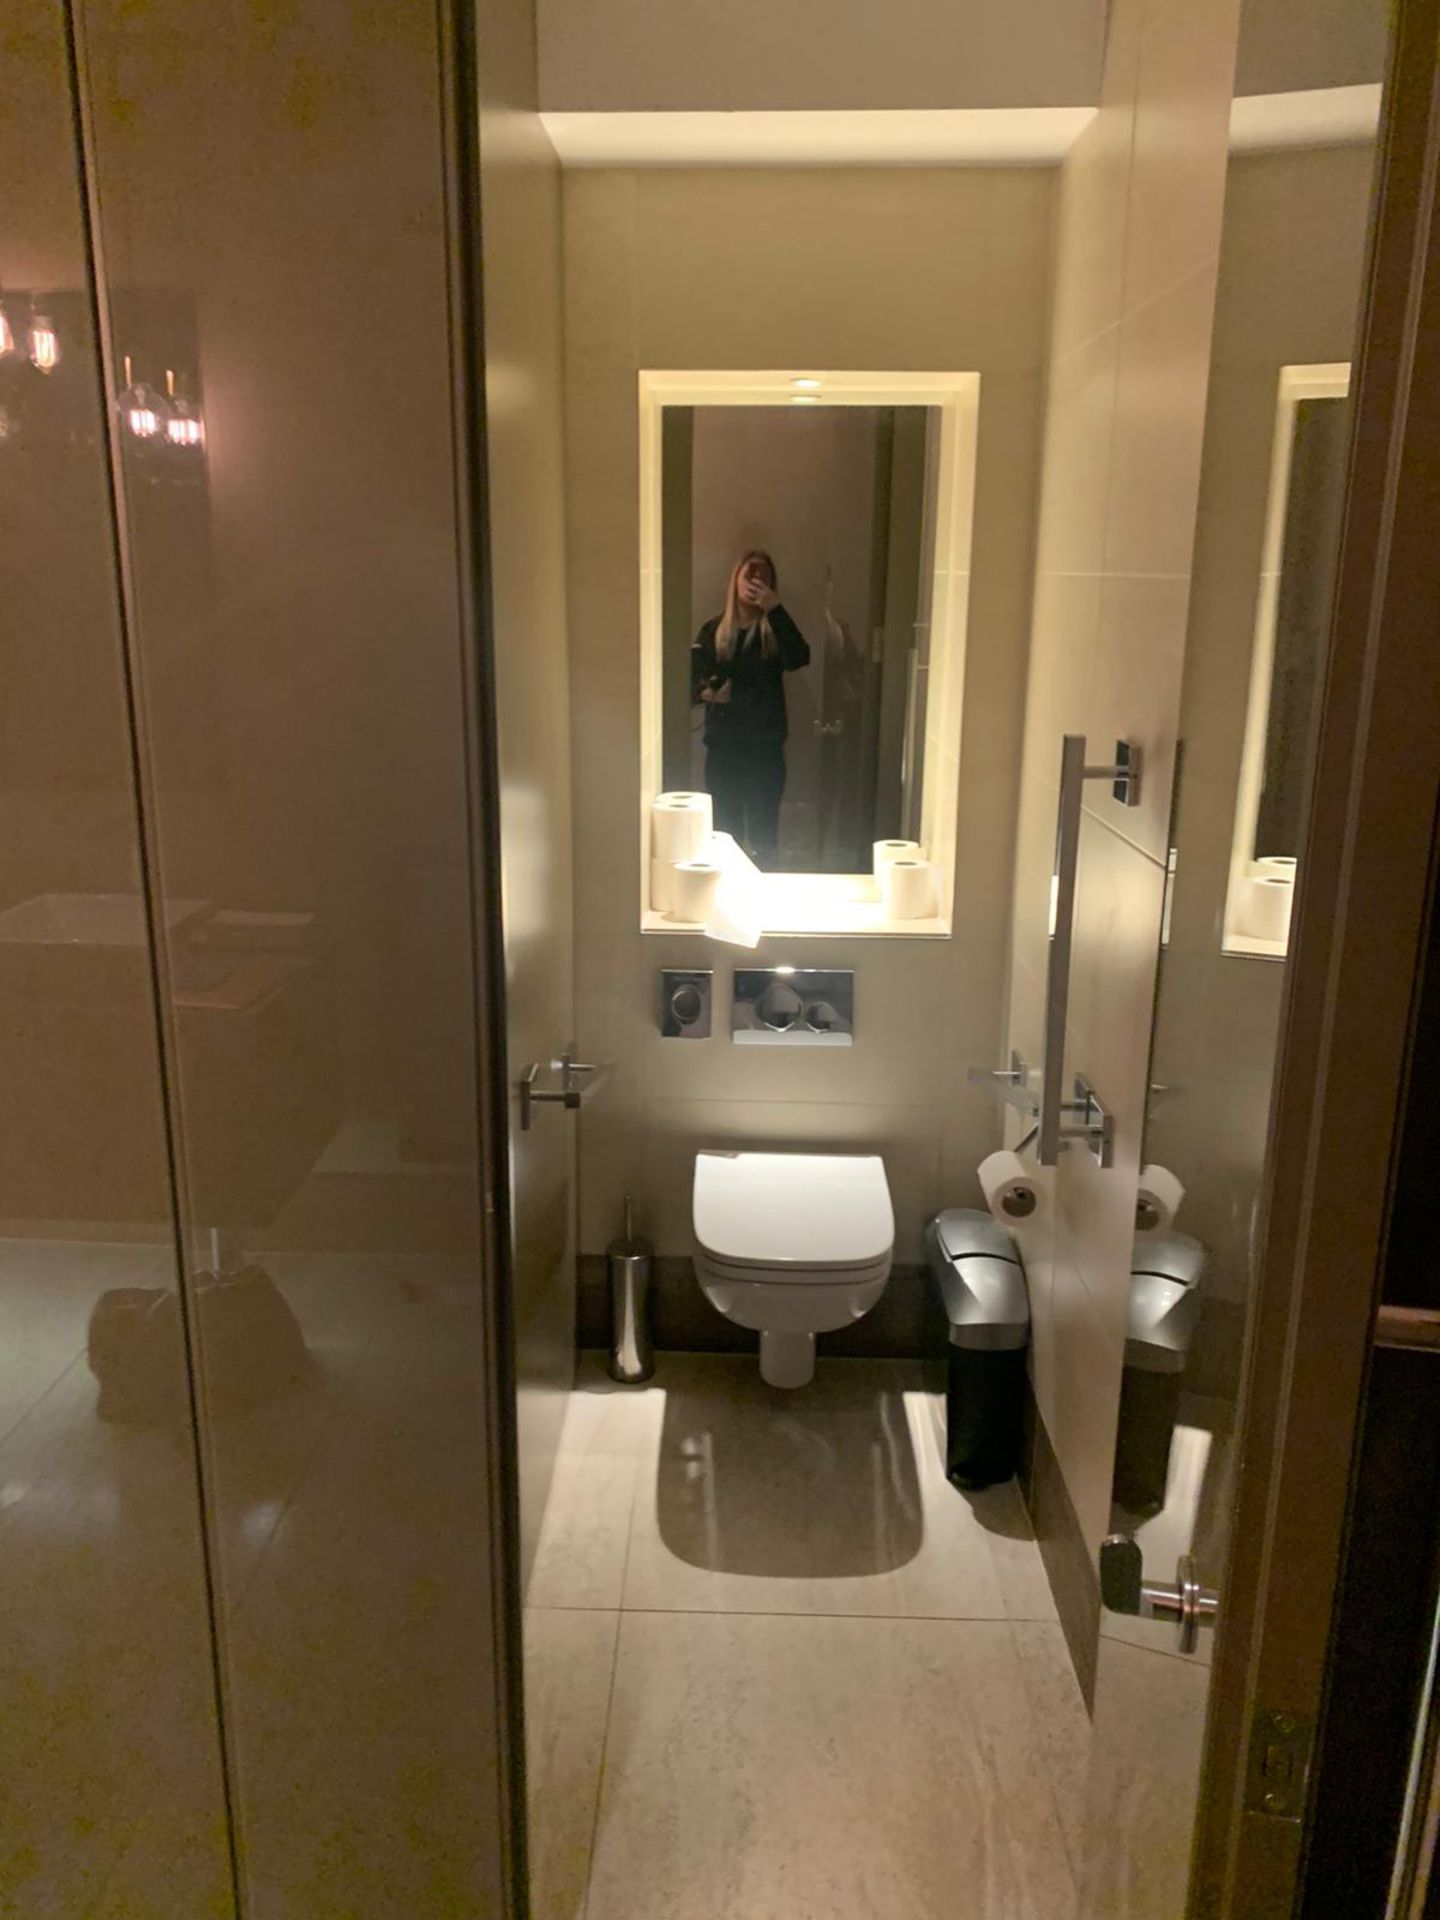 Entire Contents of Luxury Female Toilets - Image 10 of 16